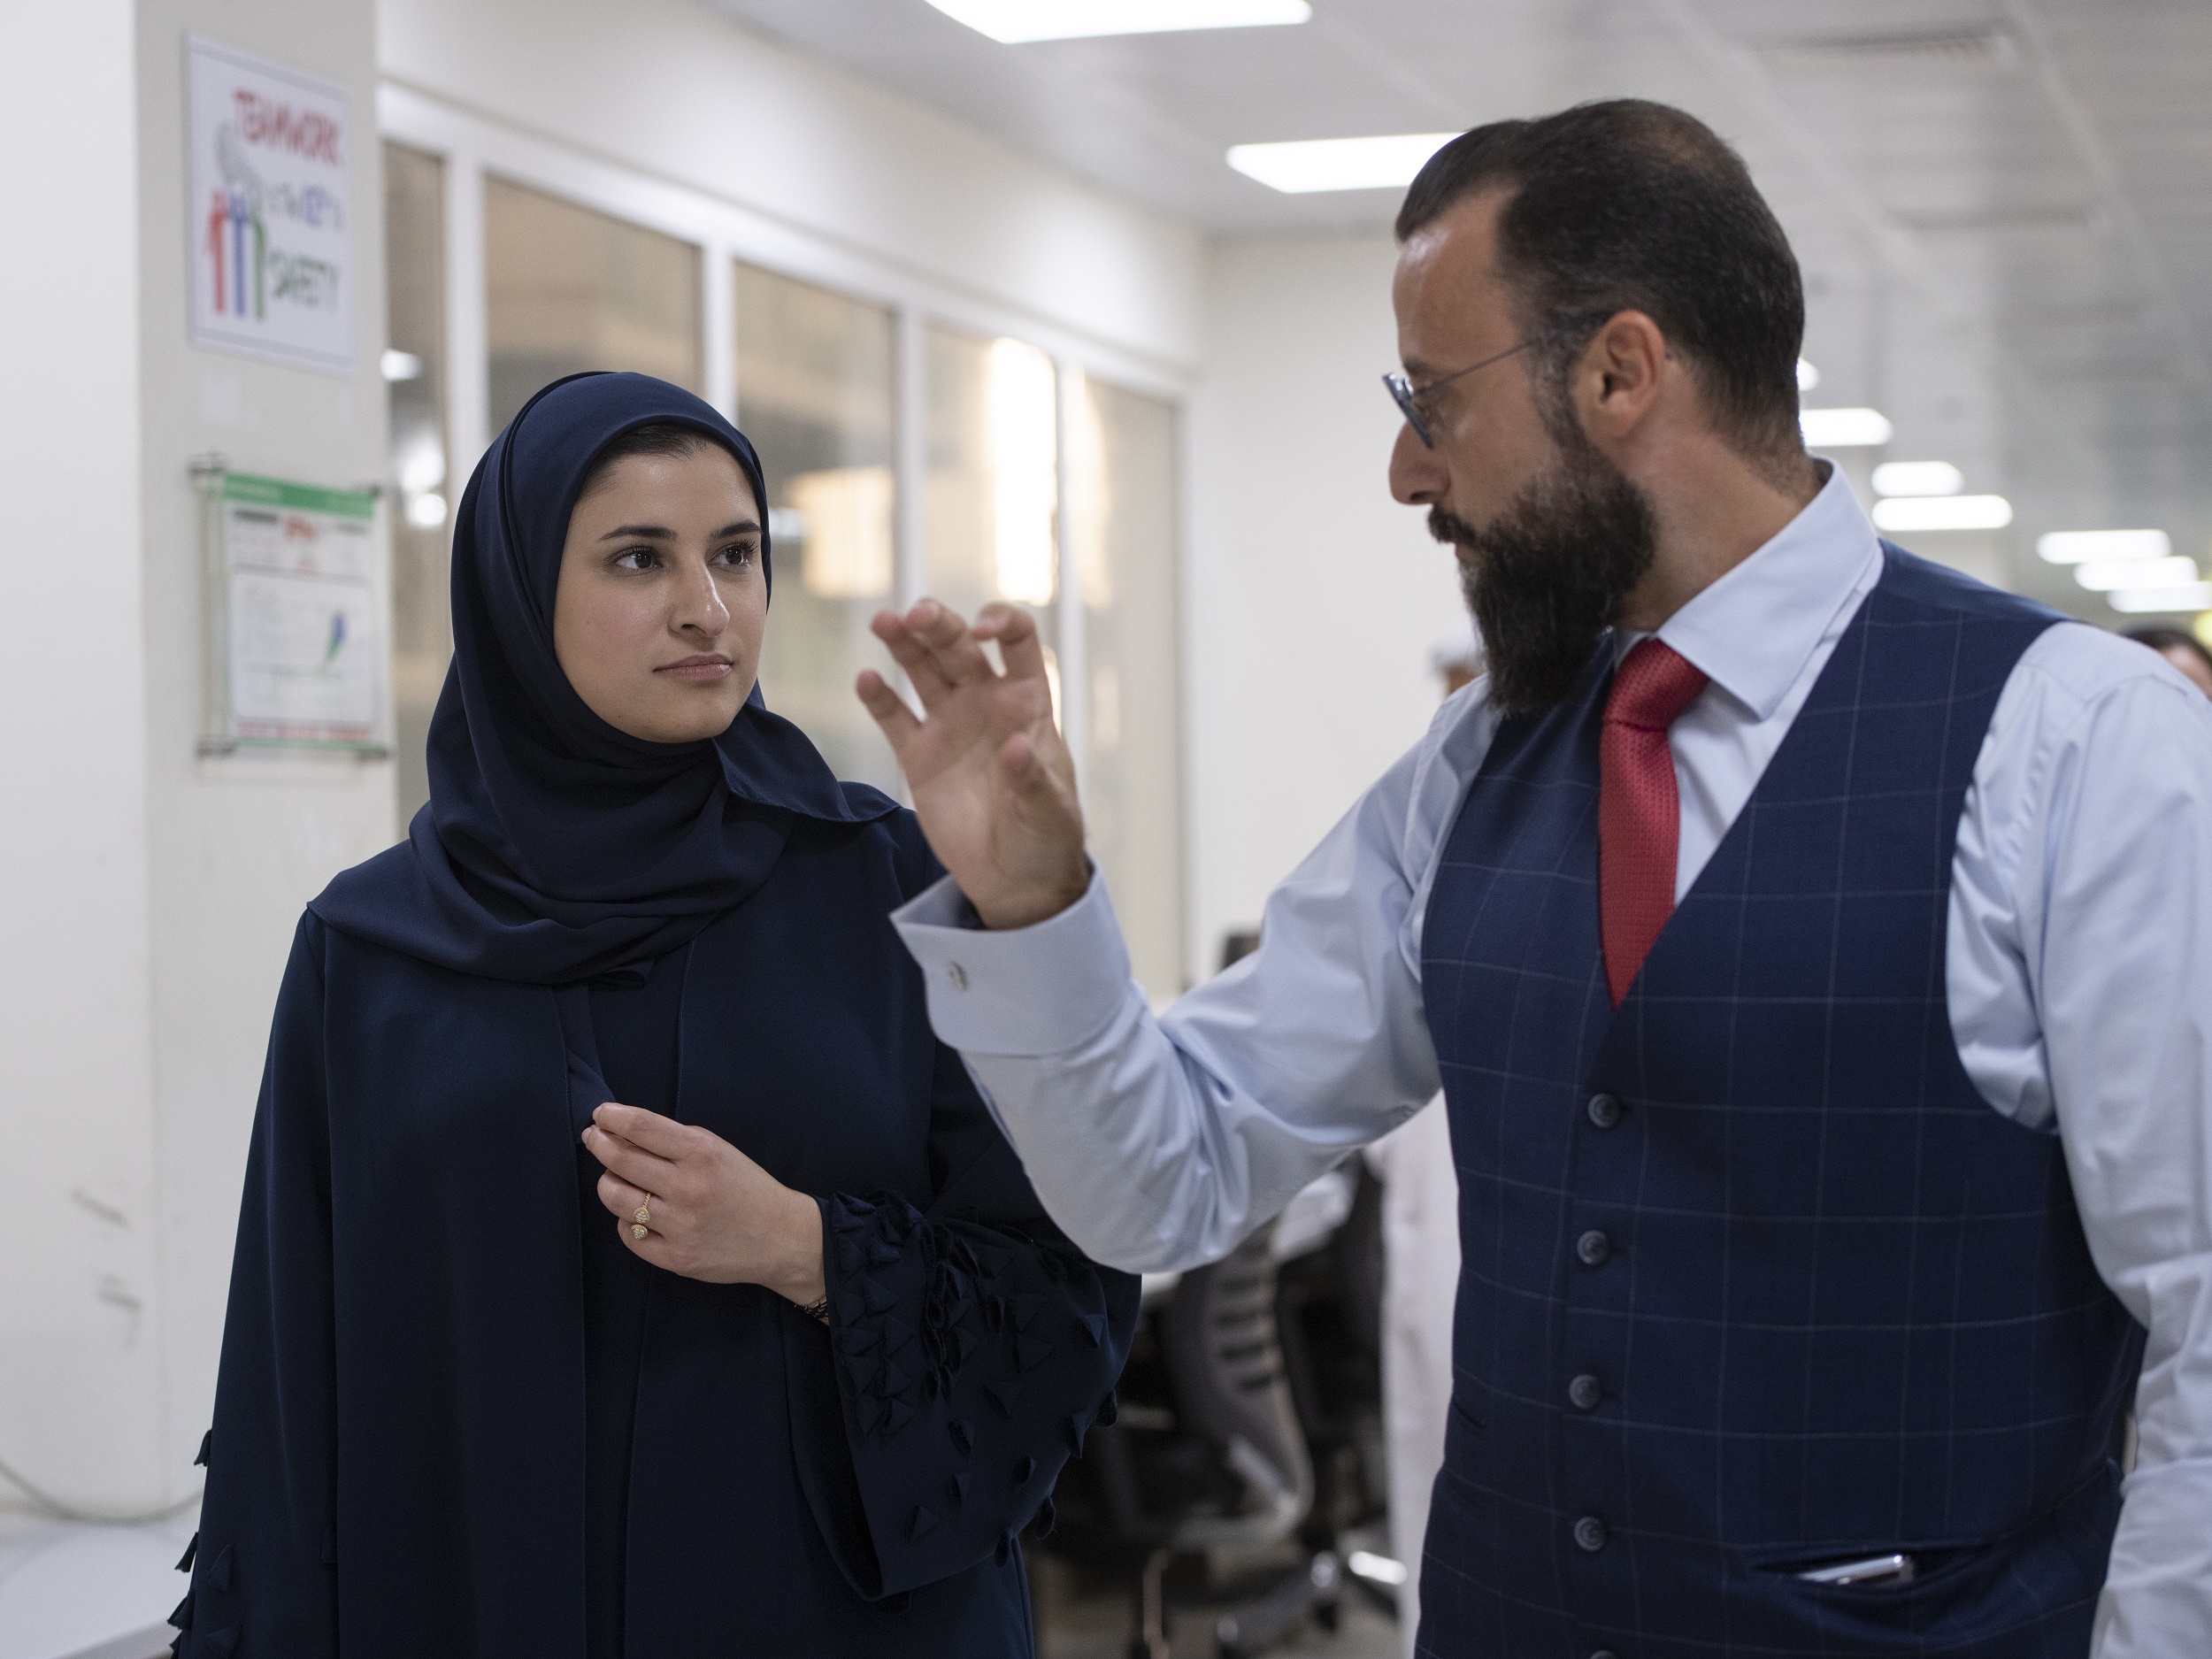 HE Sarah Al Amiri briefed on advanced technology projects at MENA’s largest paper plant